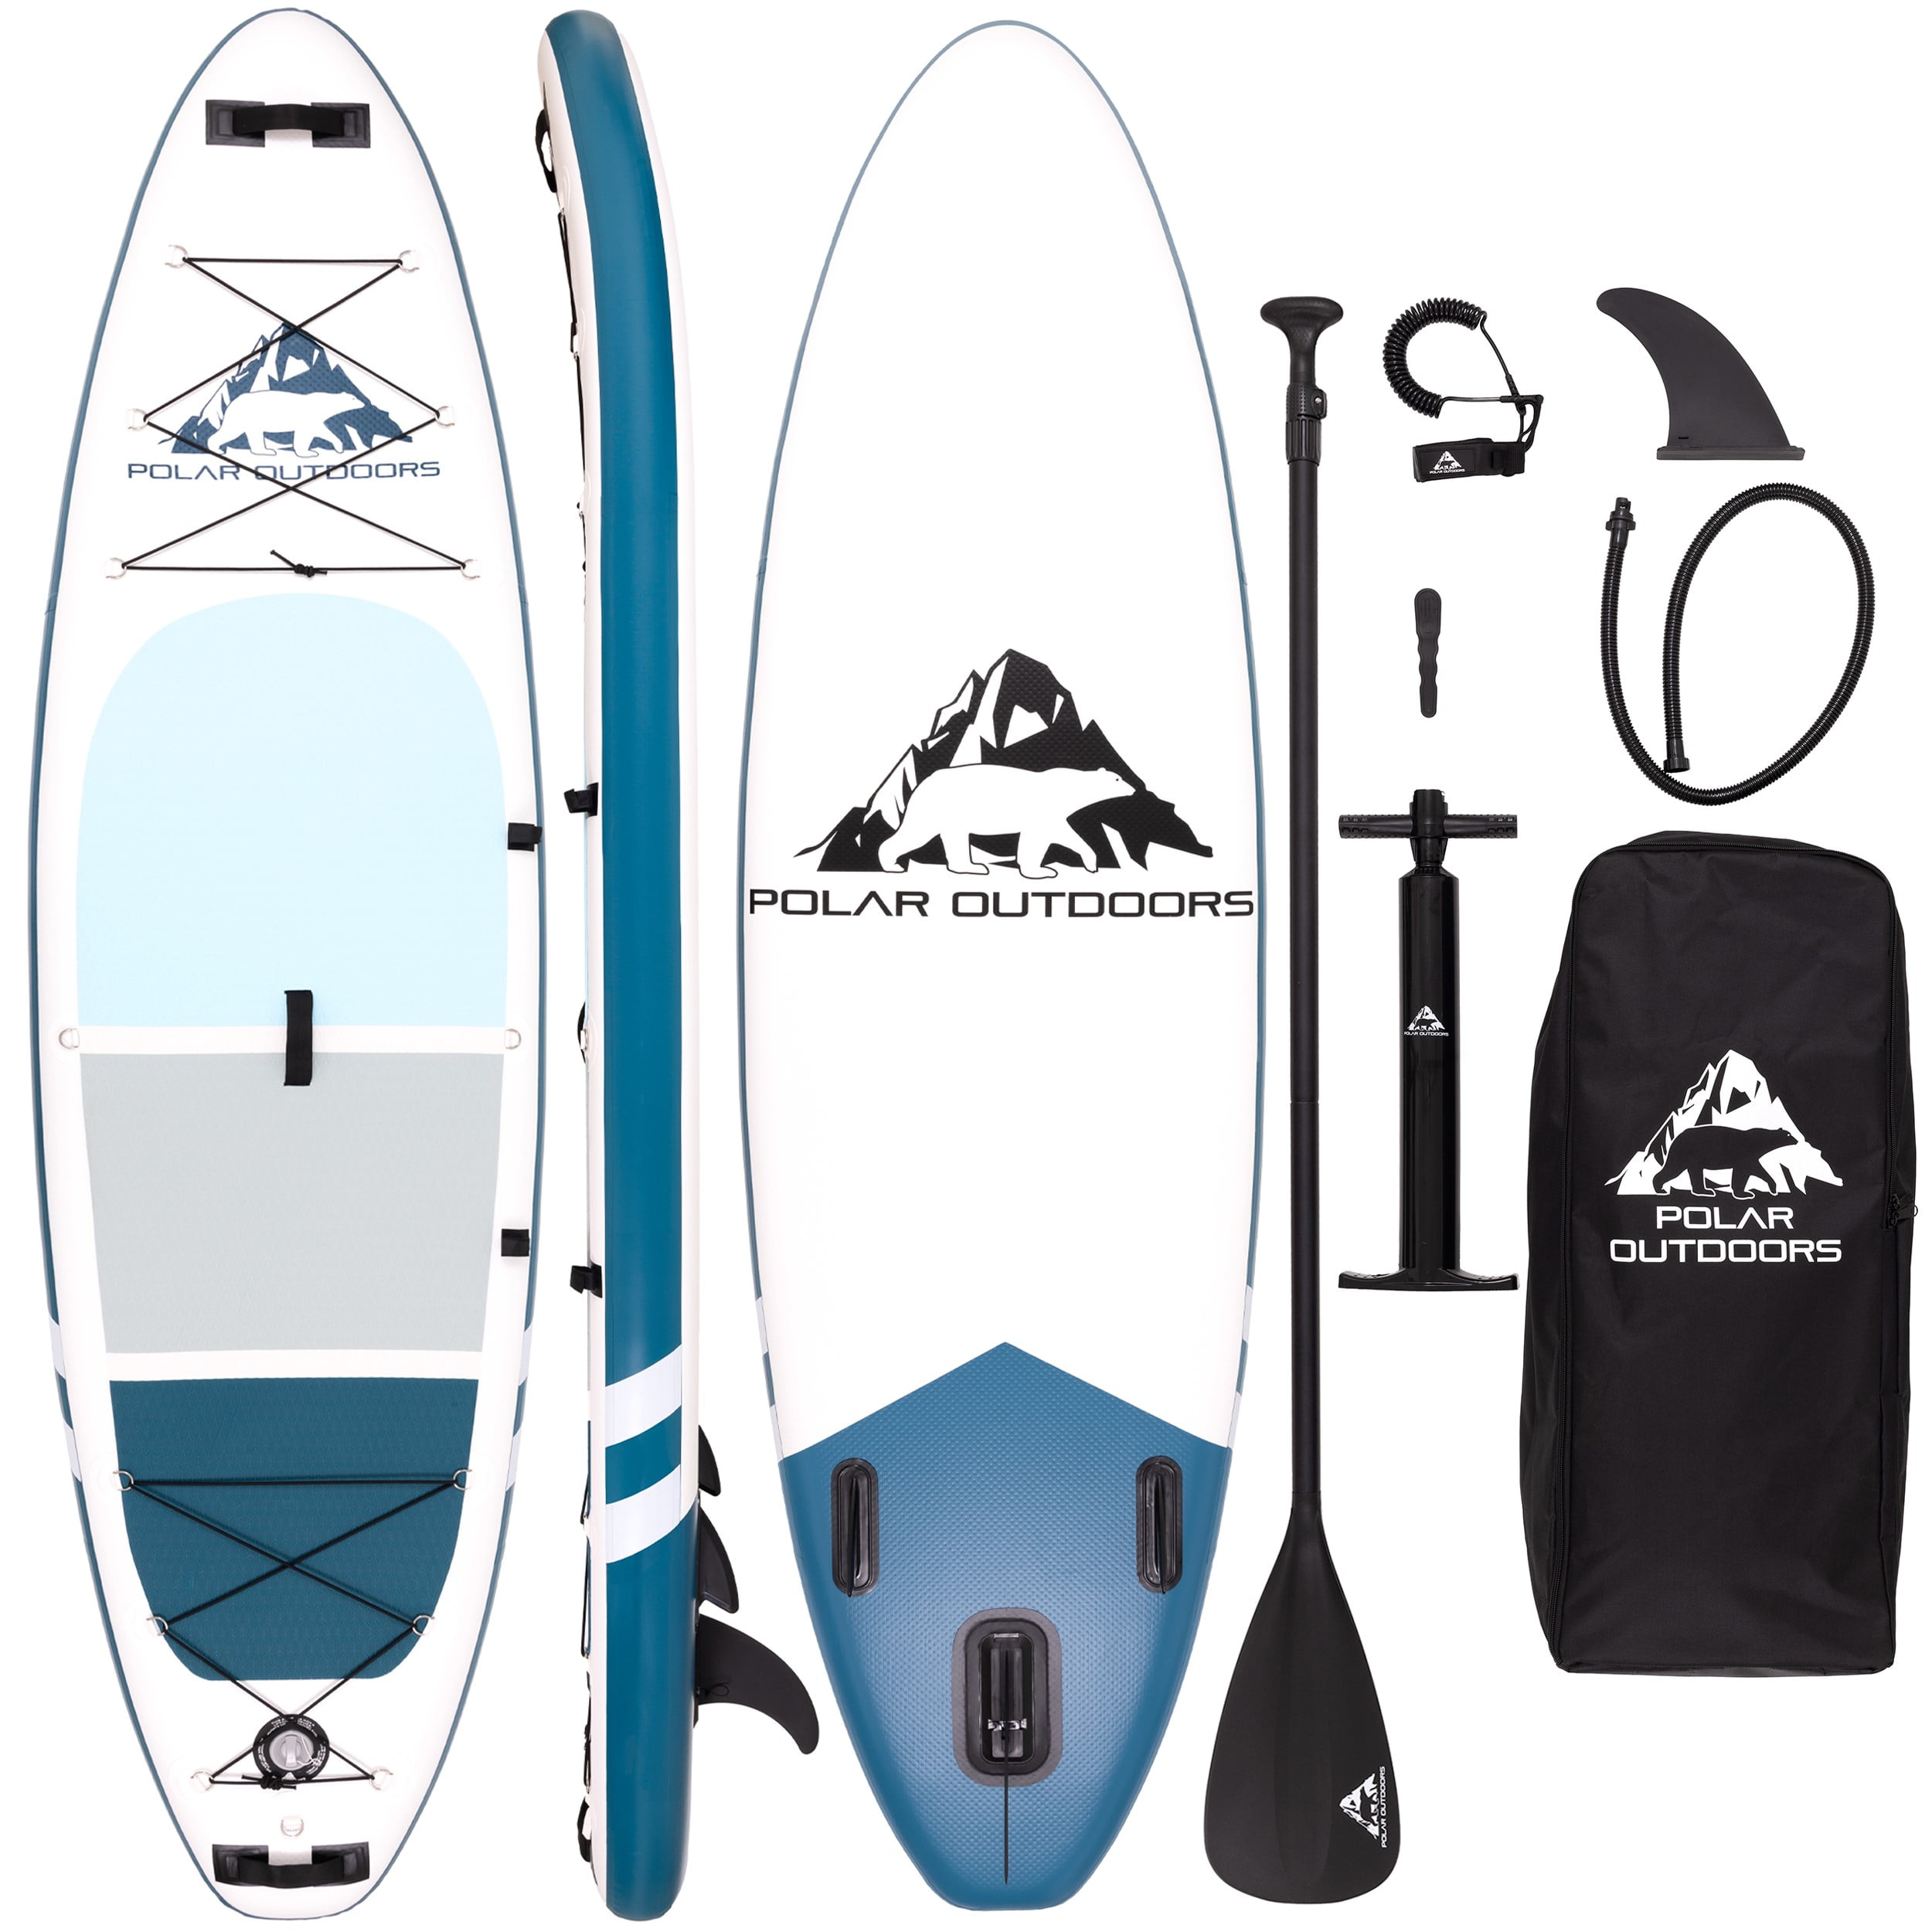 Polar Outdoors by Roc Inflatable Stand Up Paddle Board with Premium sup Accessories & Backpack, Non-Slip Deck, Waterproof Bag, Leash, Paddle and Hand Pump - image 1 of 3